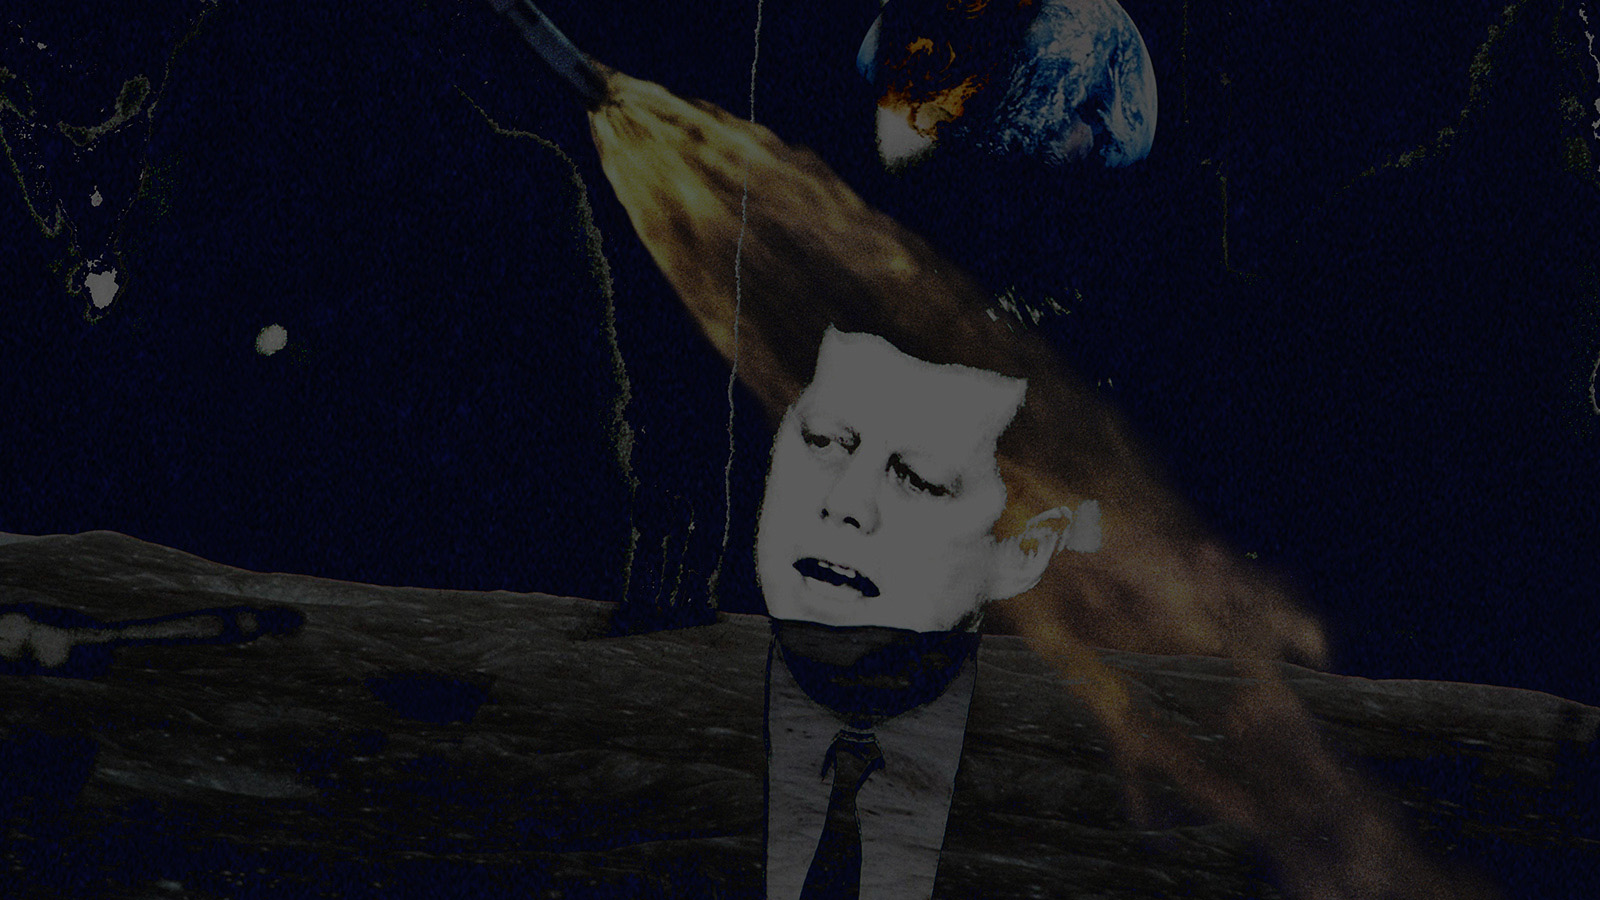 A collage showing cut out images of President John F Kennedy, a space shuttle with its rocket firing. In the background is a shot of the Earth from the surface of the moon.